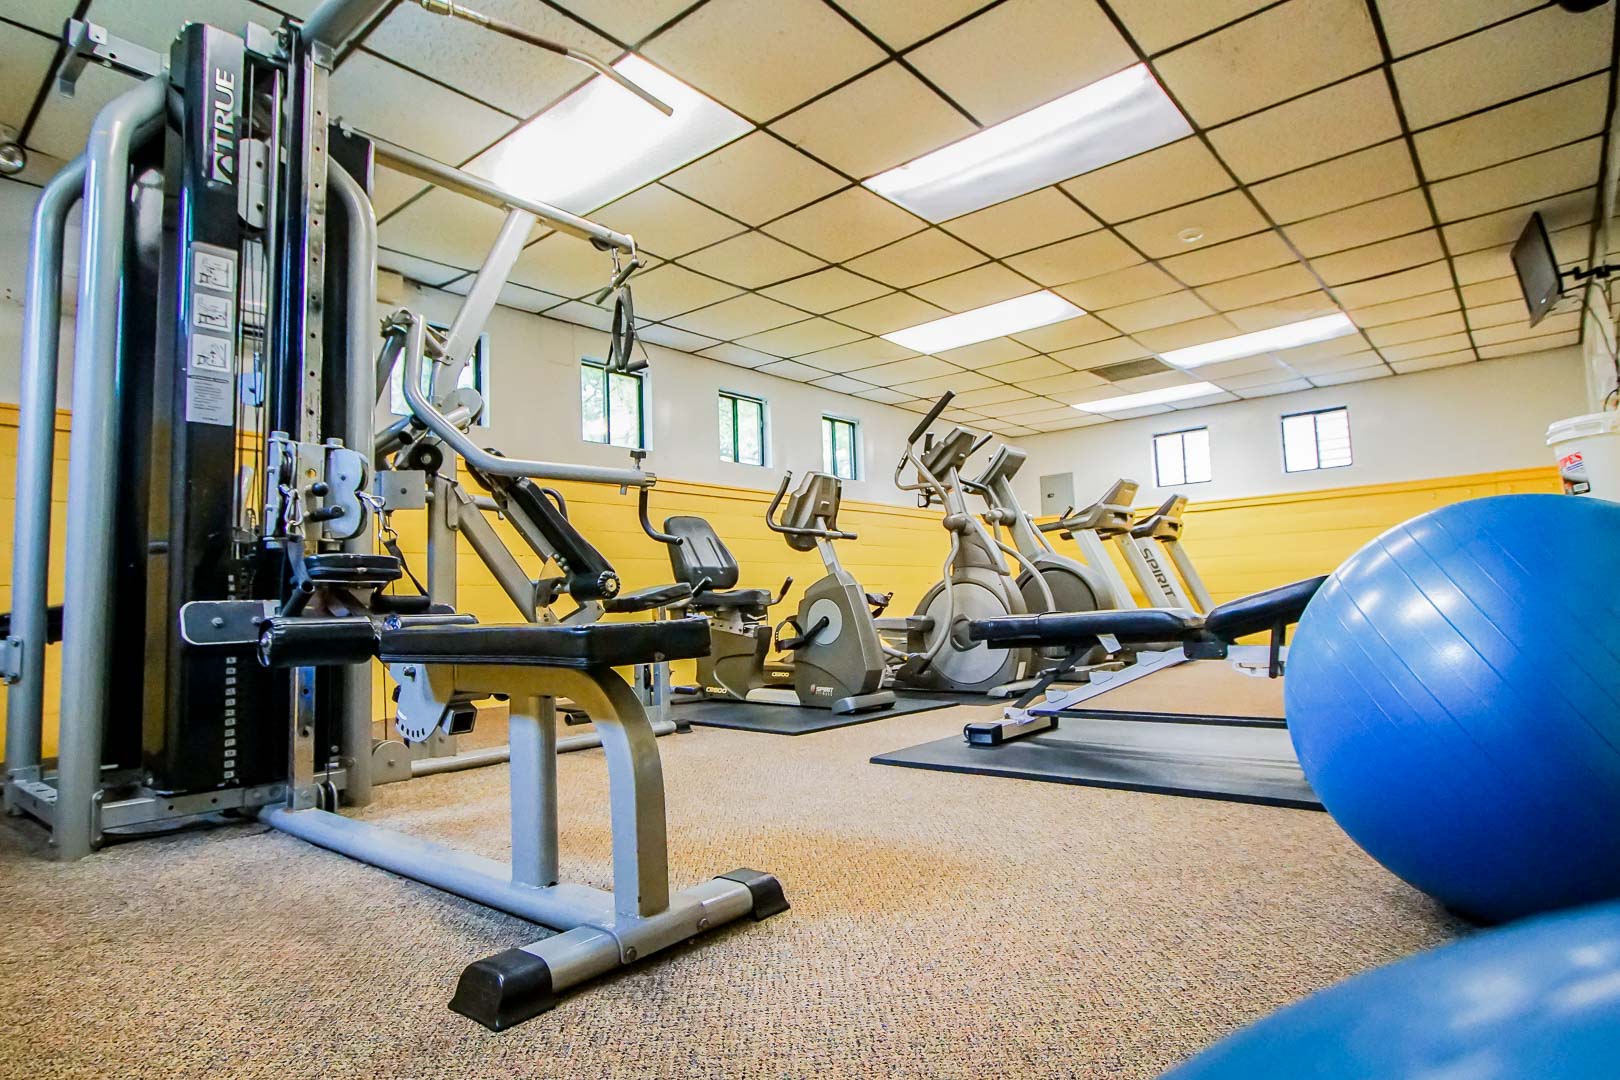 Resort amenities such as an exercise room available at VRI's Sea Mist Resort in Massachusetts.